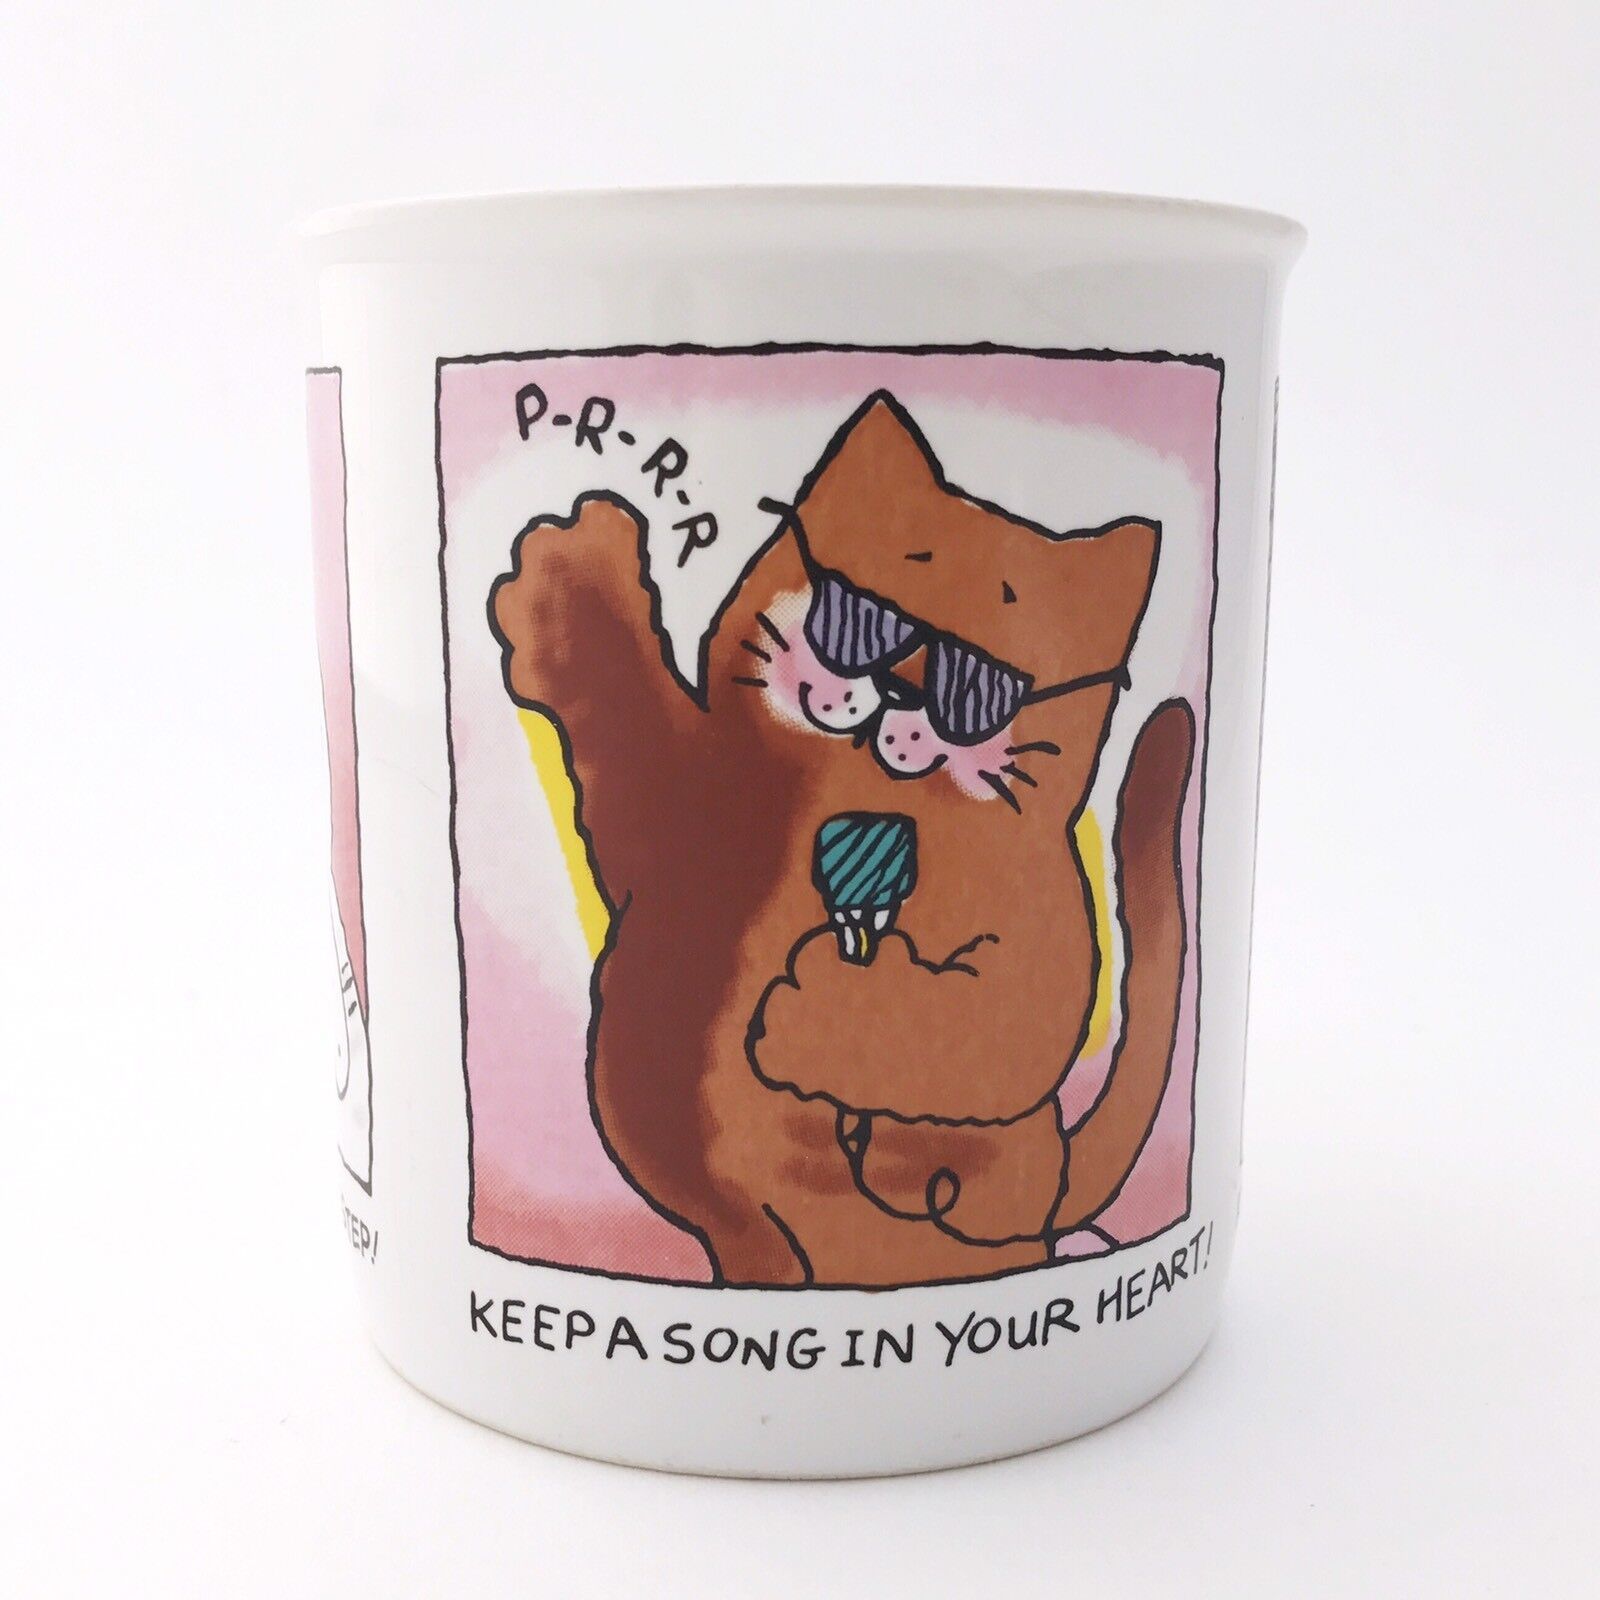 Primary image for Vintage 80s Hallmark Mug Mates Cat Coffee Cup Dancing Singing 1985 Gift